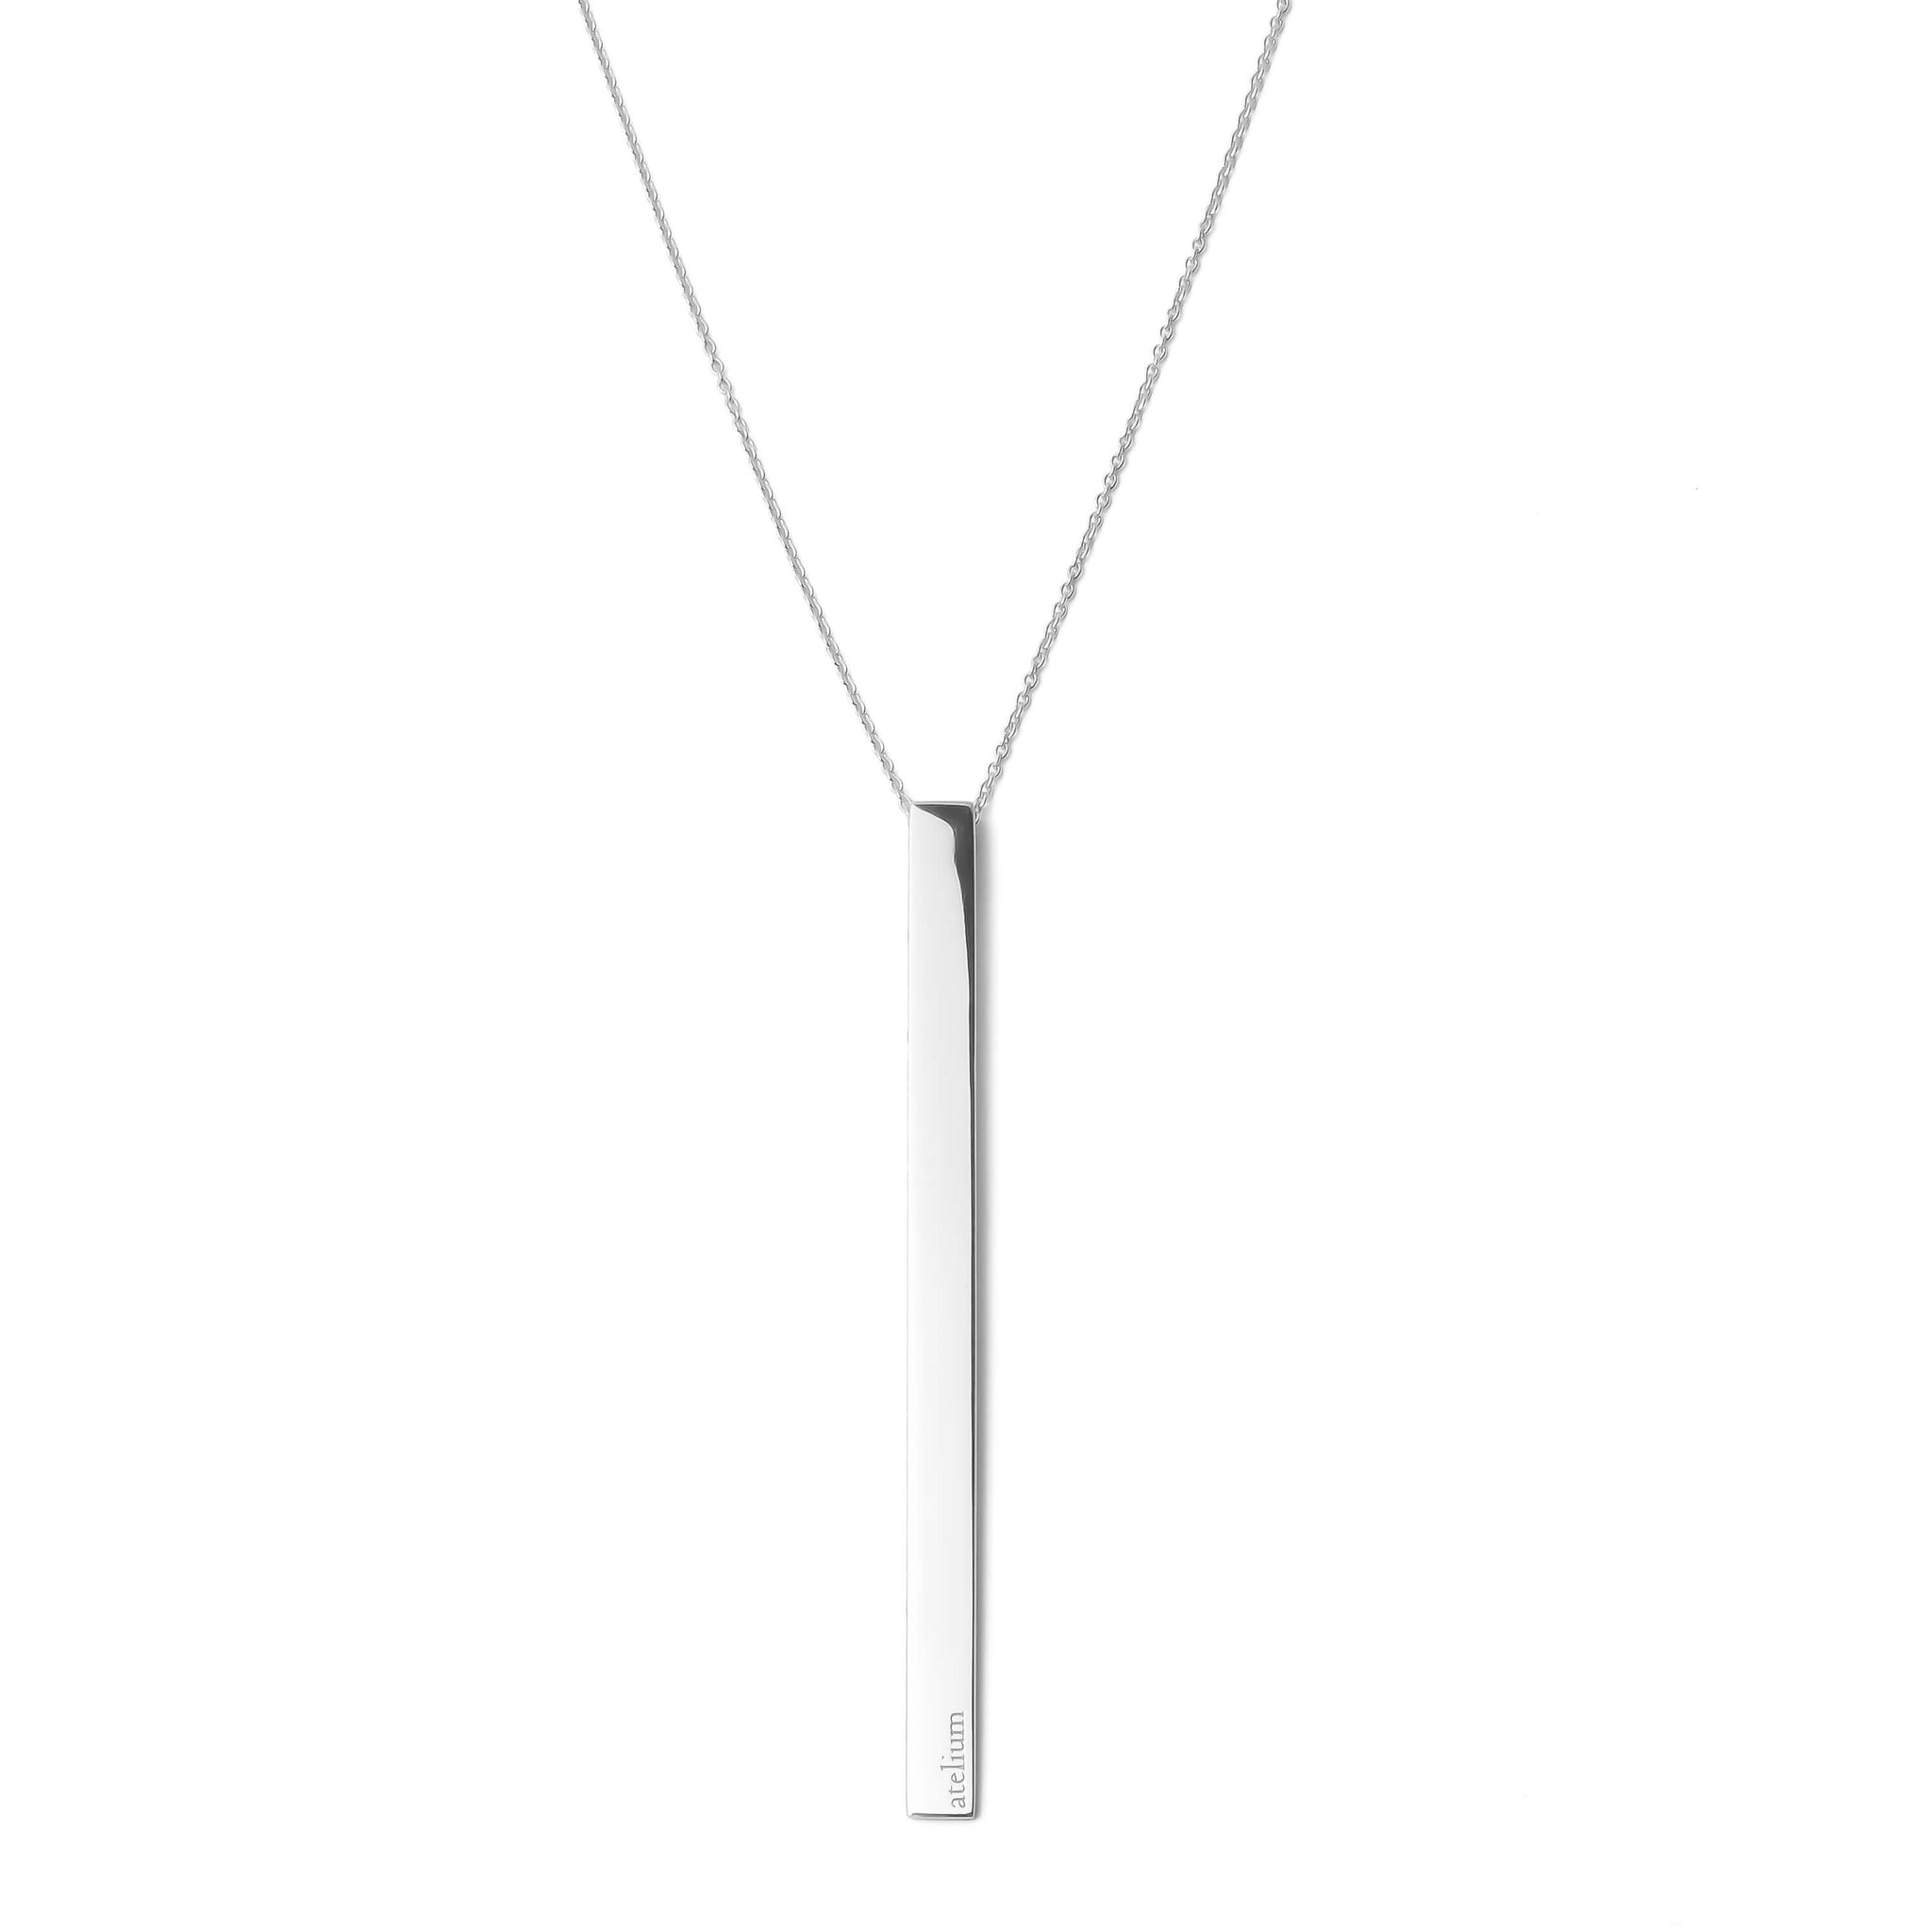 Thin silver necklace with a long bar shaped silver pendant 